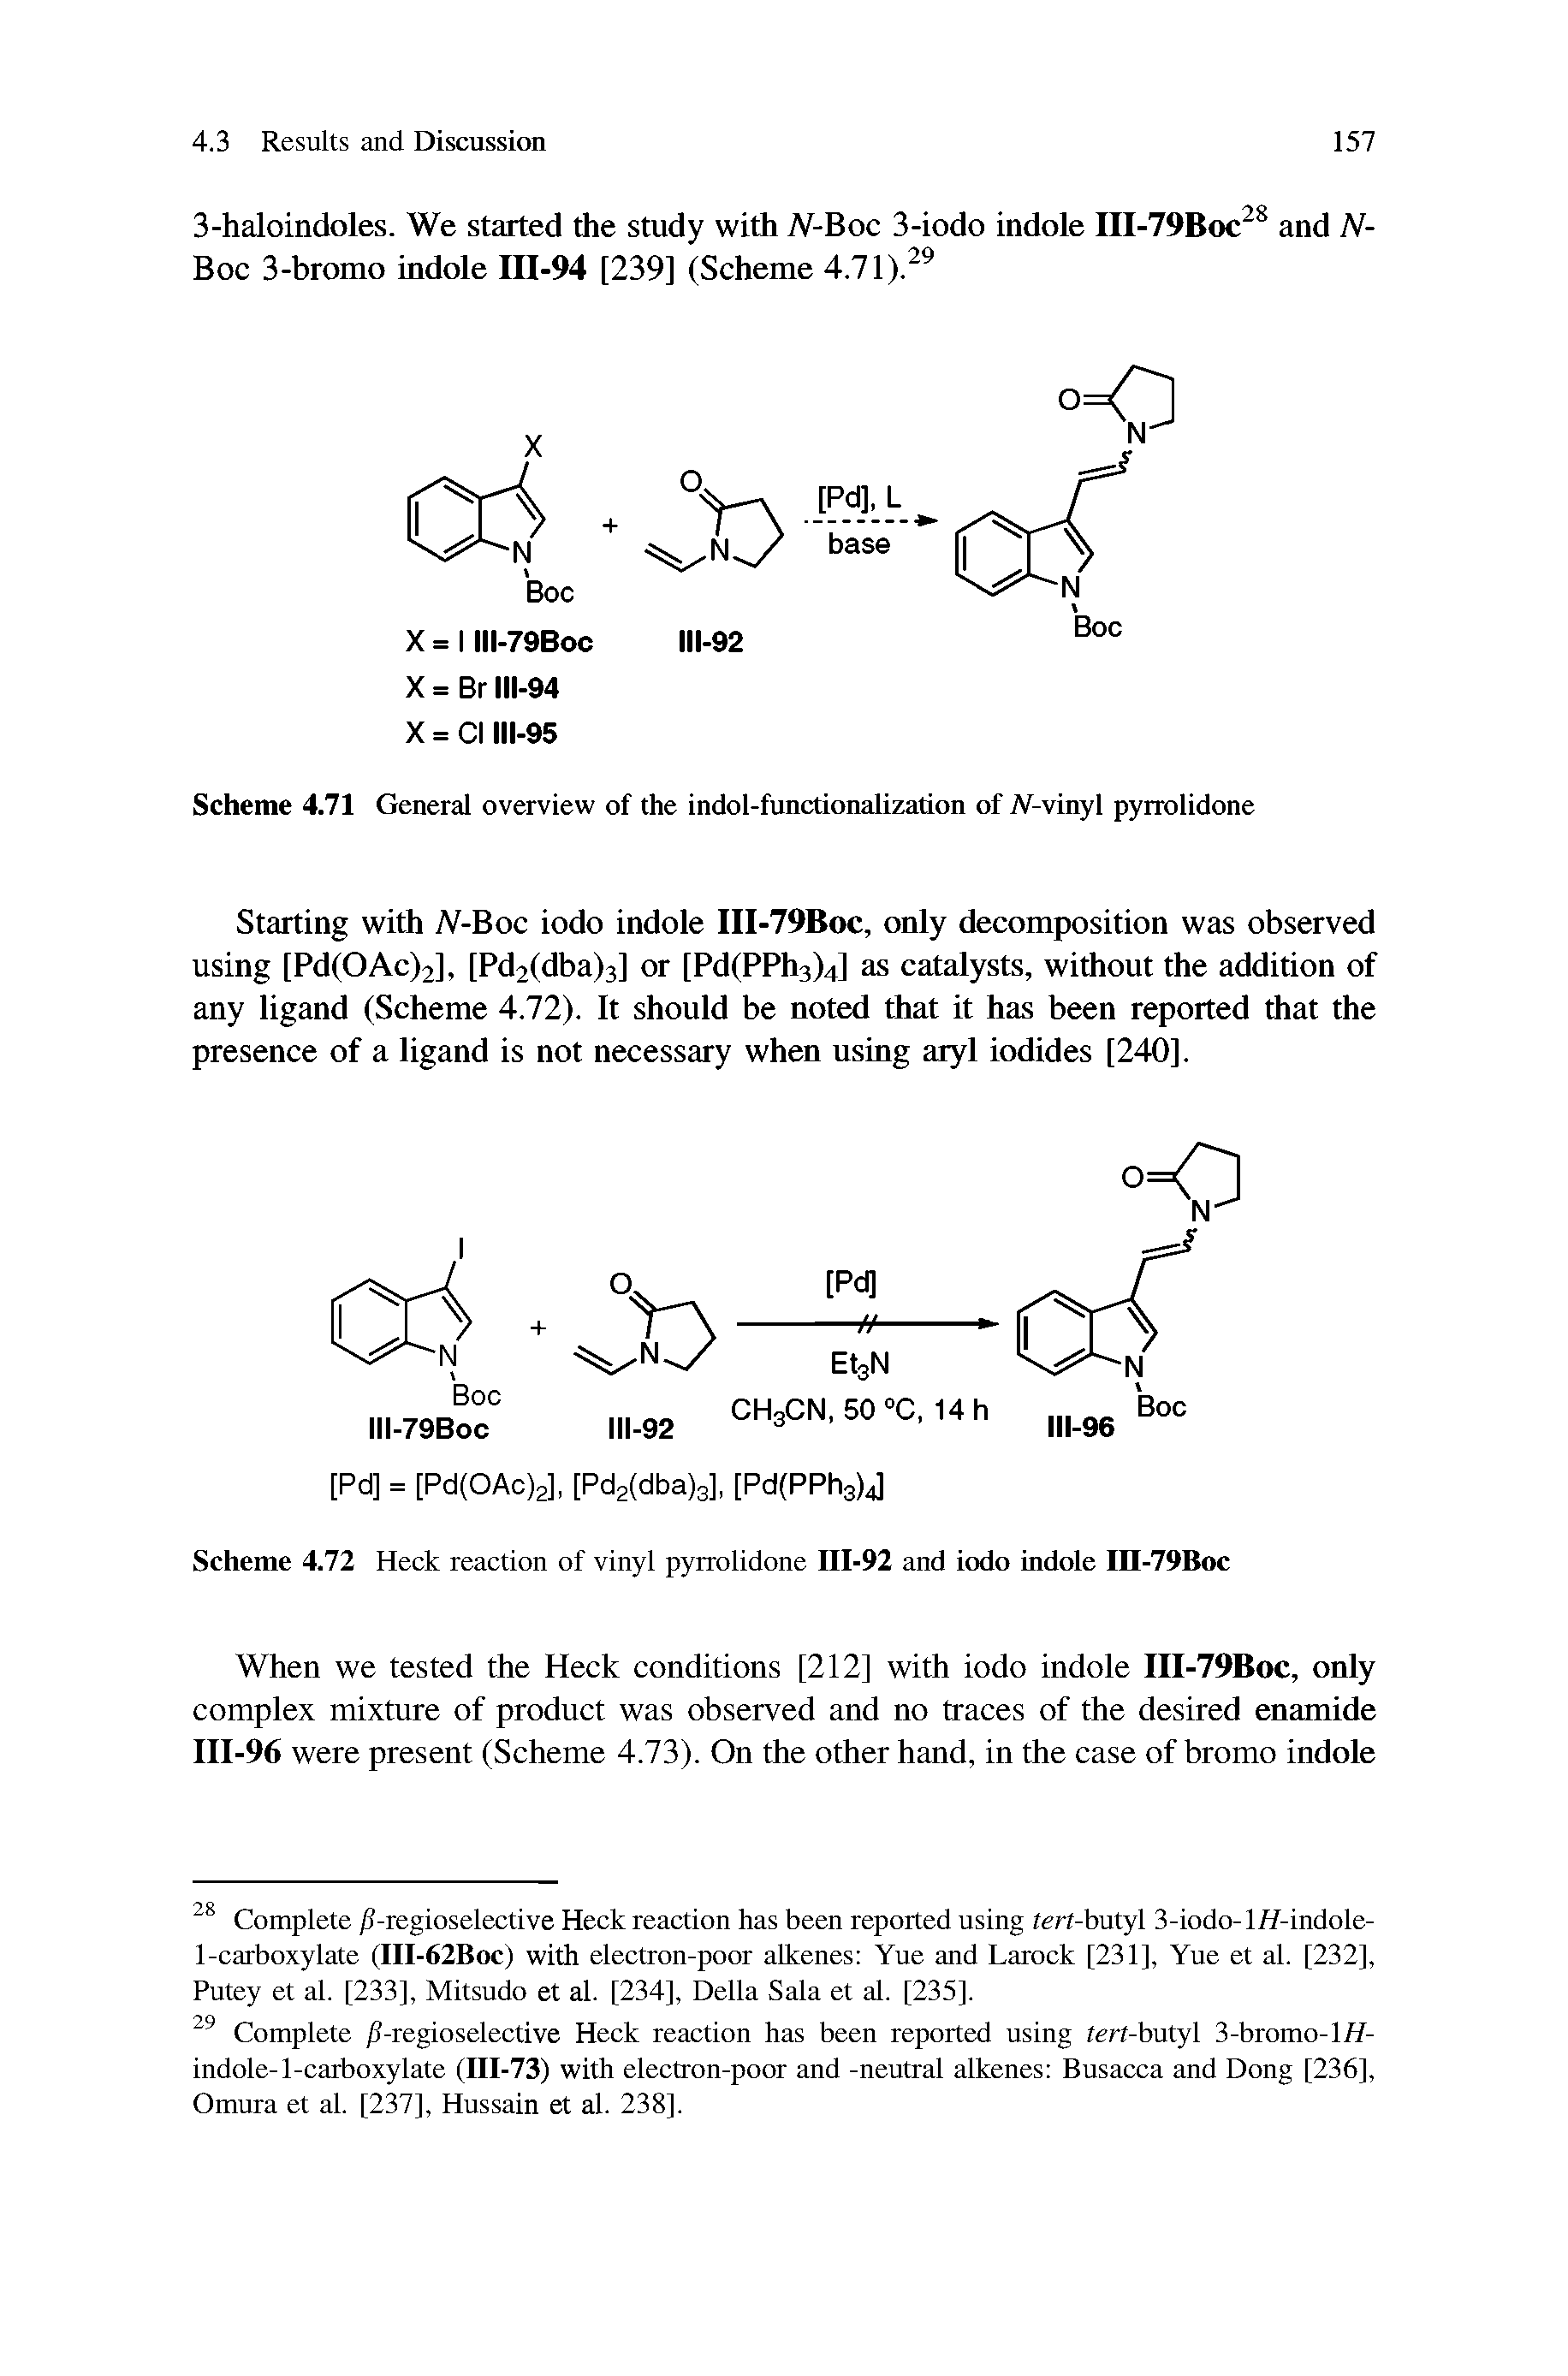 Scheme 4.71 General overview of the indol-functionalization of iV-vinyl pyrrolidone...